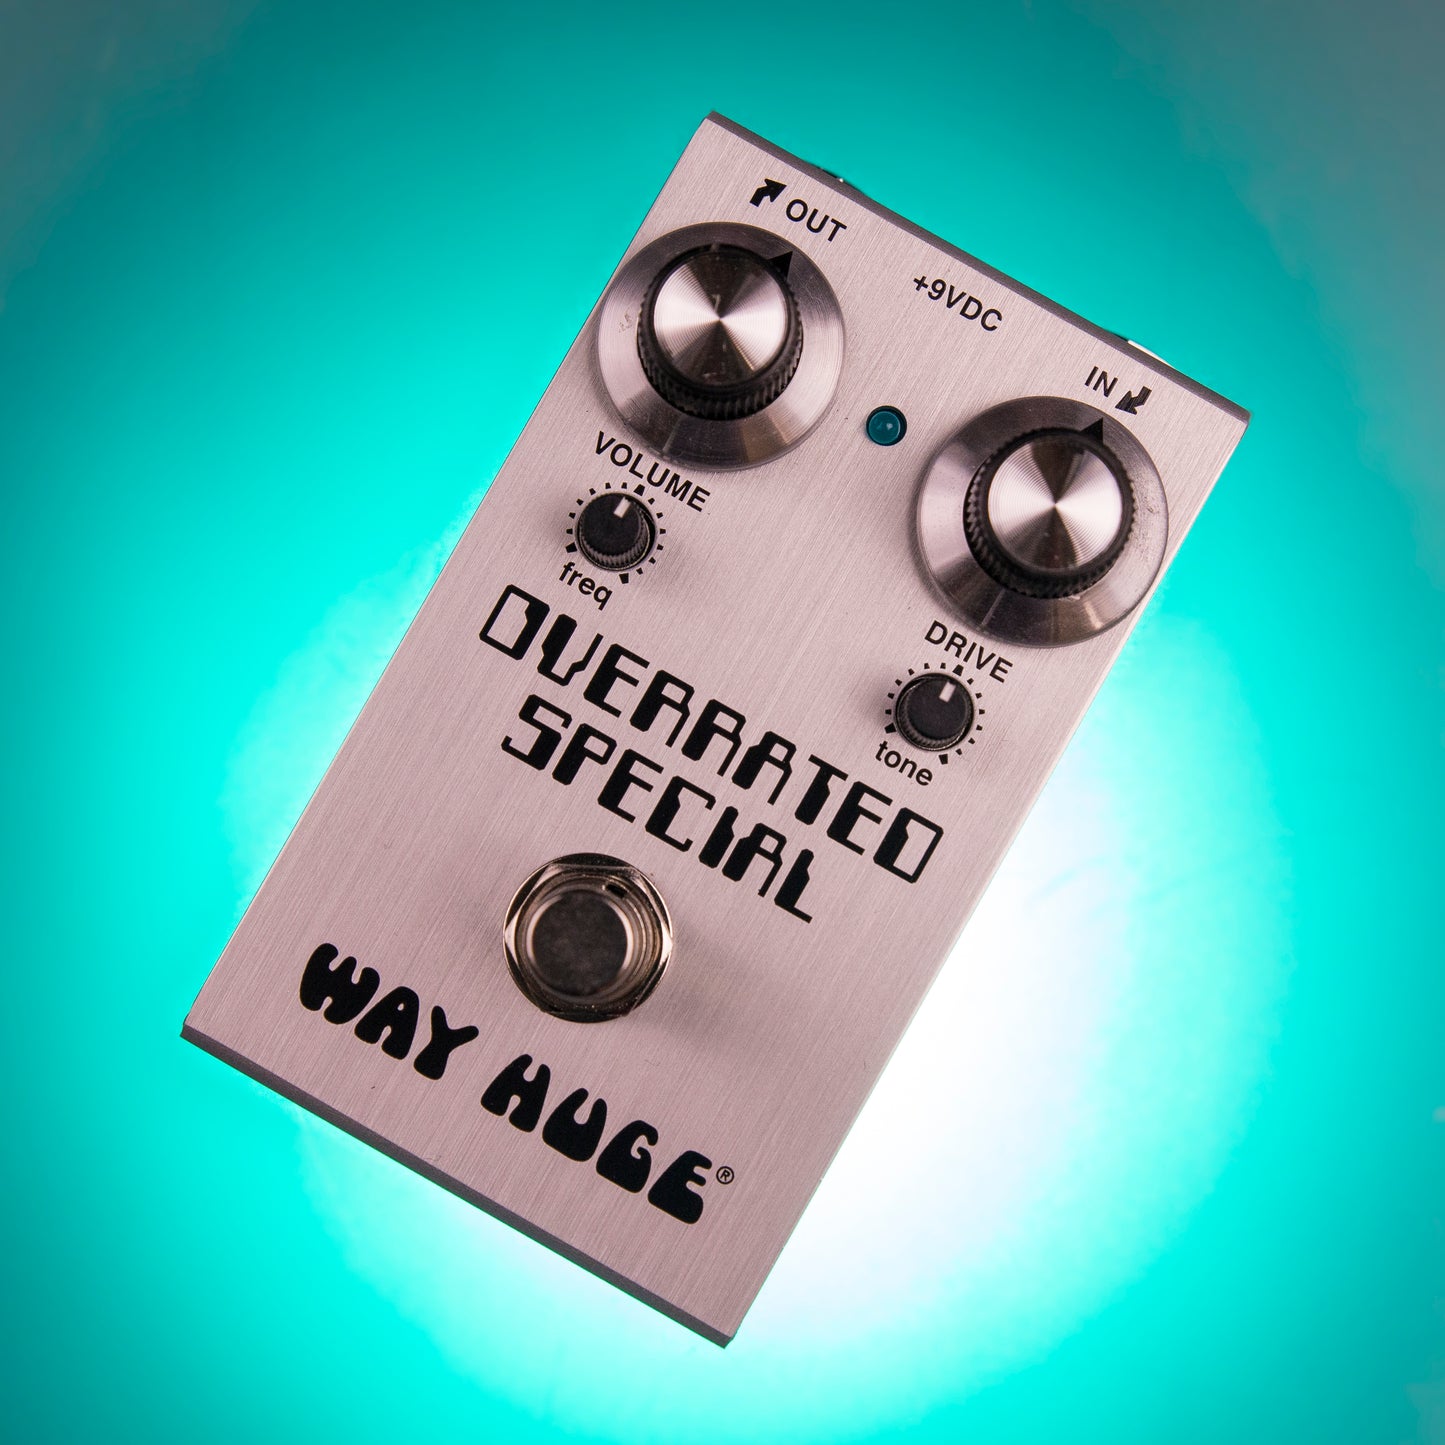 Way Huge Smalls Overrated Special Overdrive